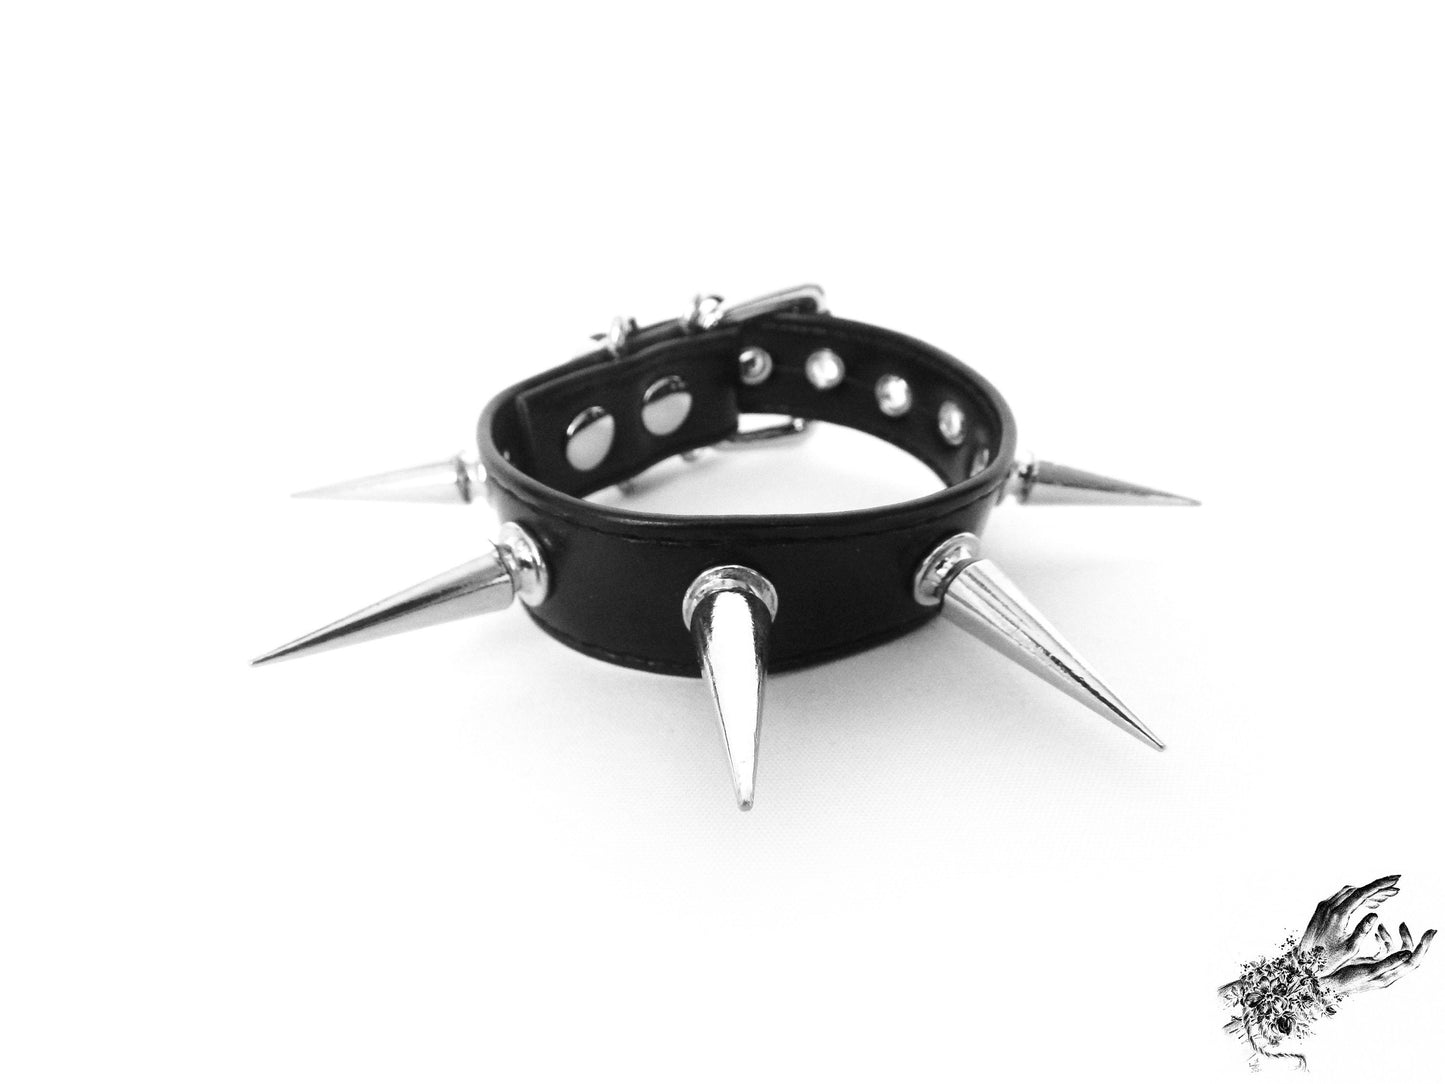 Black Spike Studded Ankle Cuffs